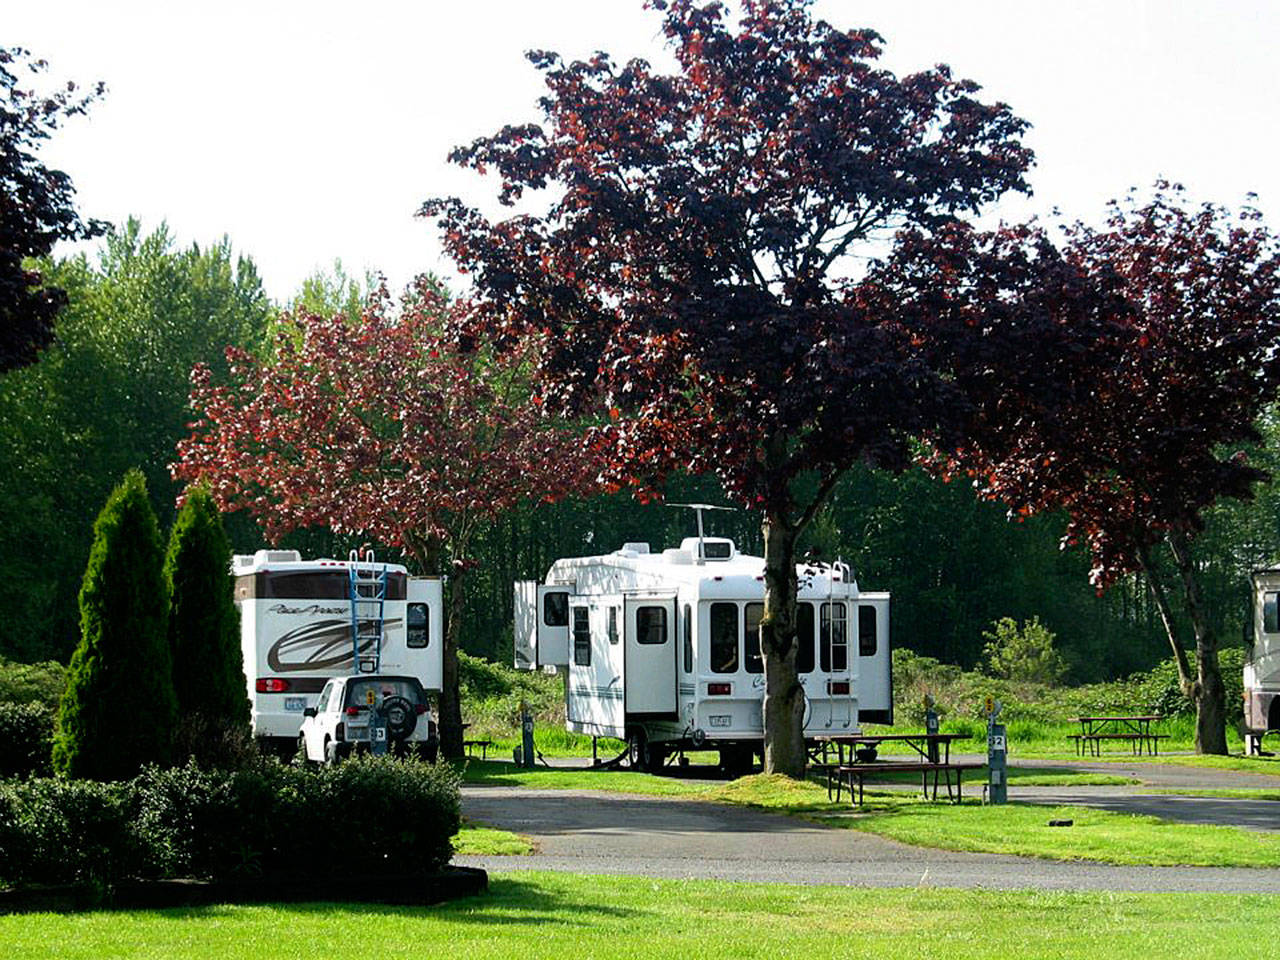 KOA will need to replace 30 campsites in Kent because of a Green River levee project by the King County Flood Control District. COURTESY PHOTO, KOA